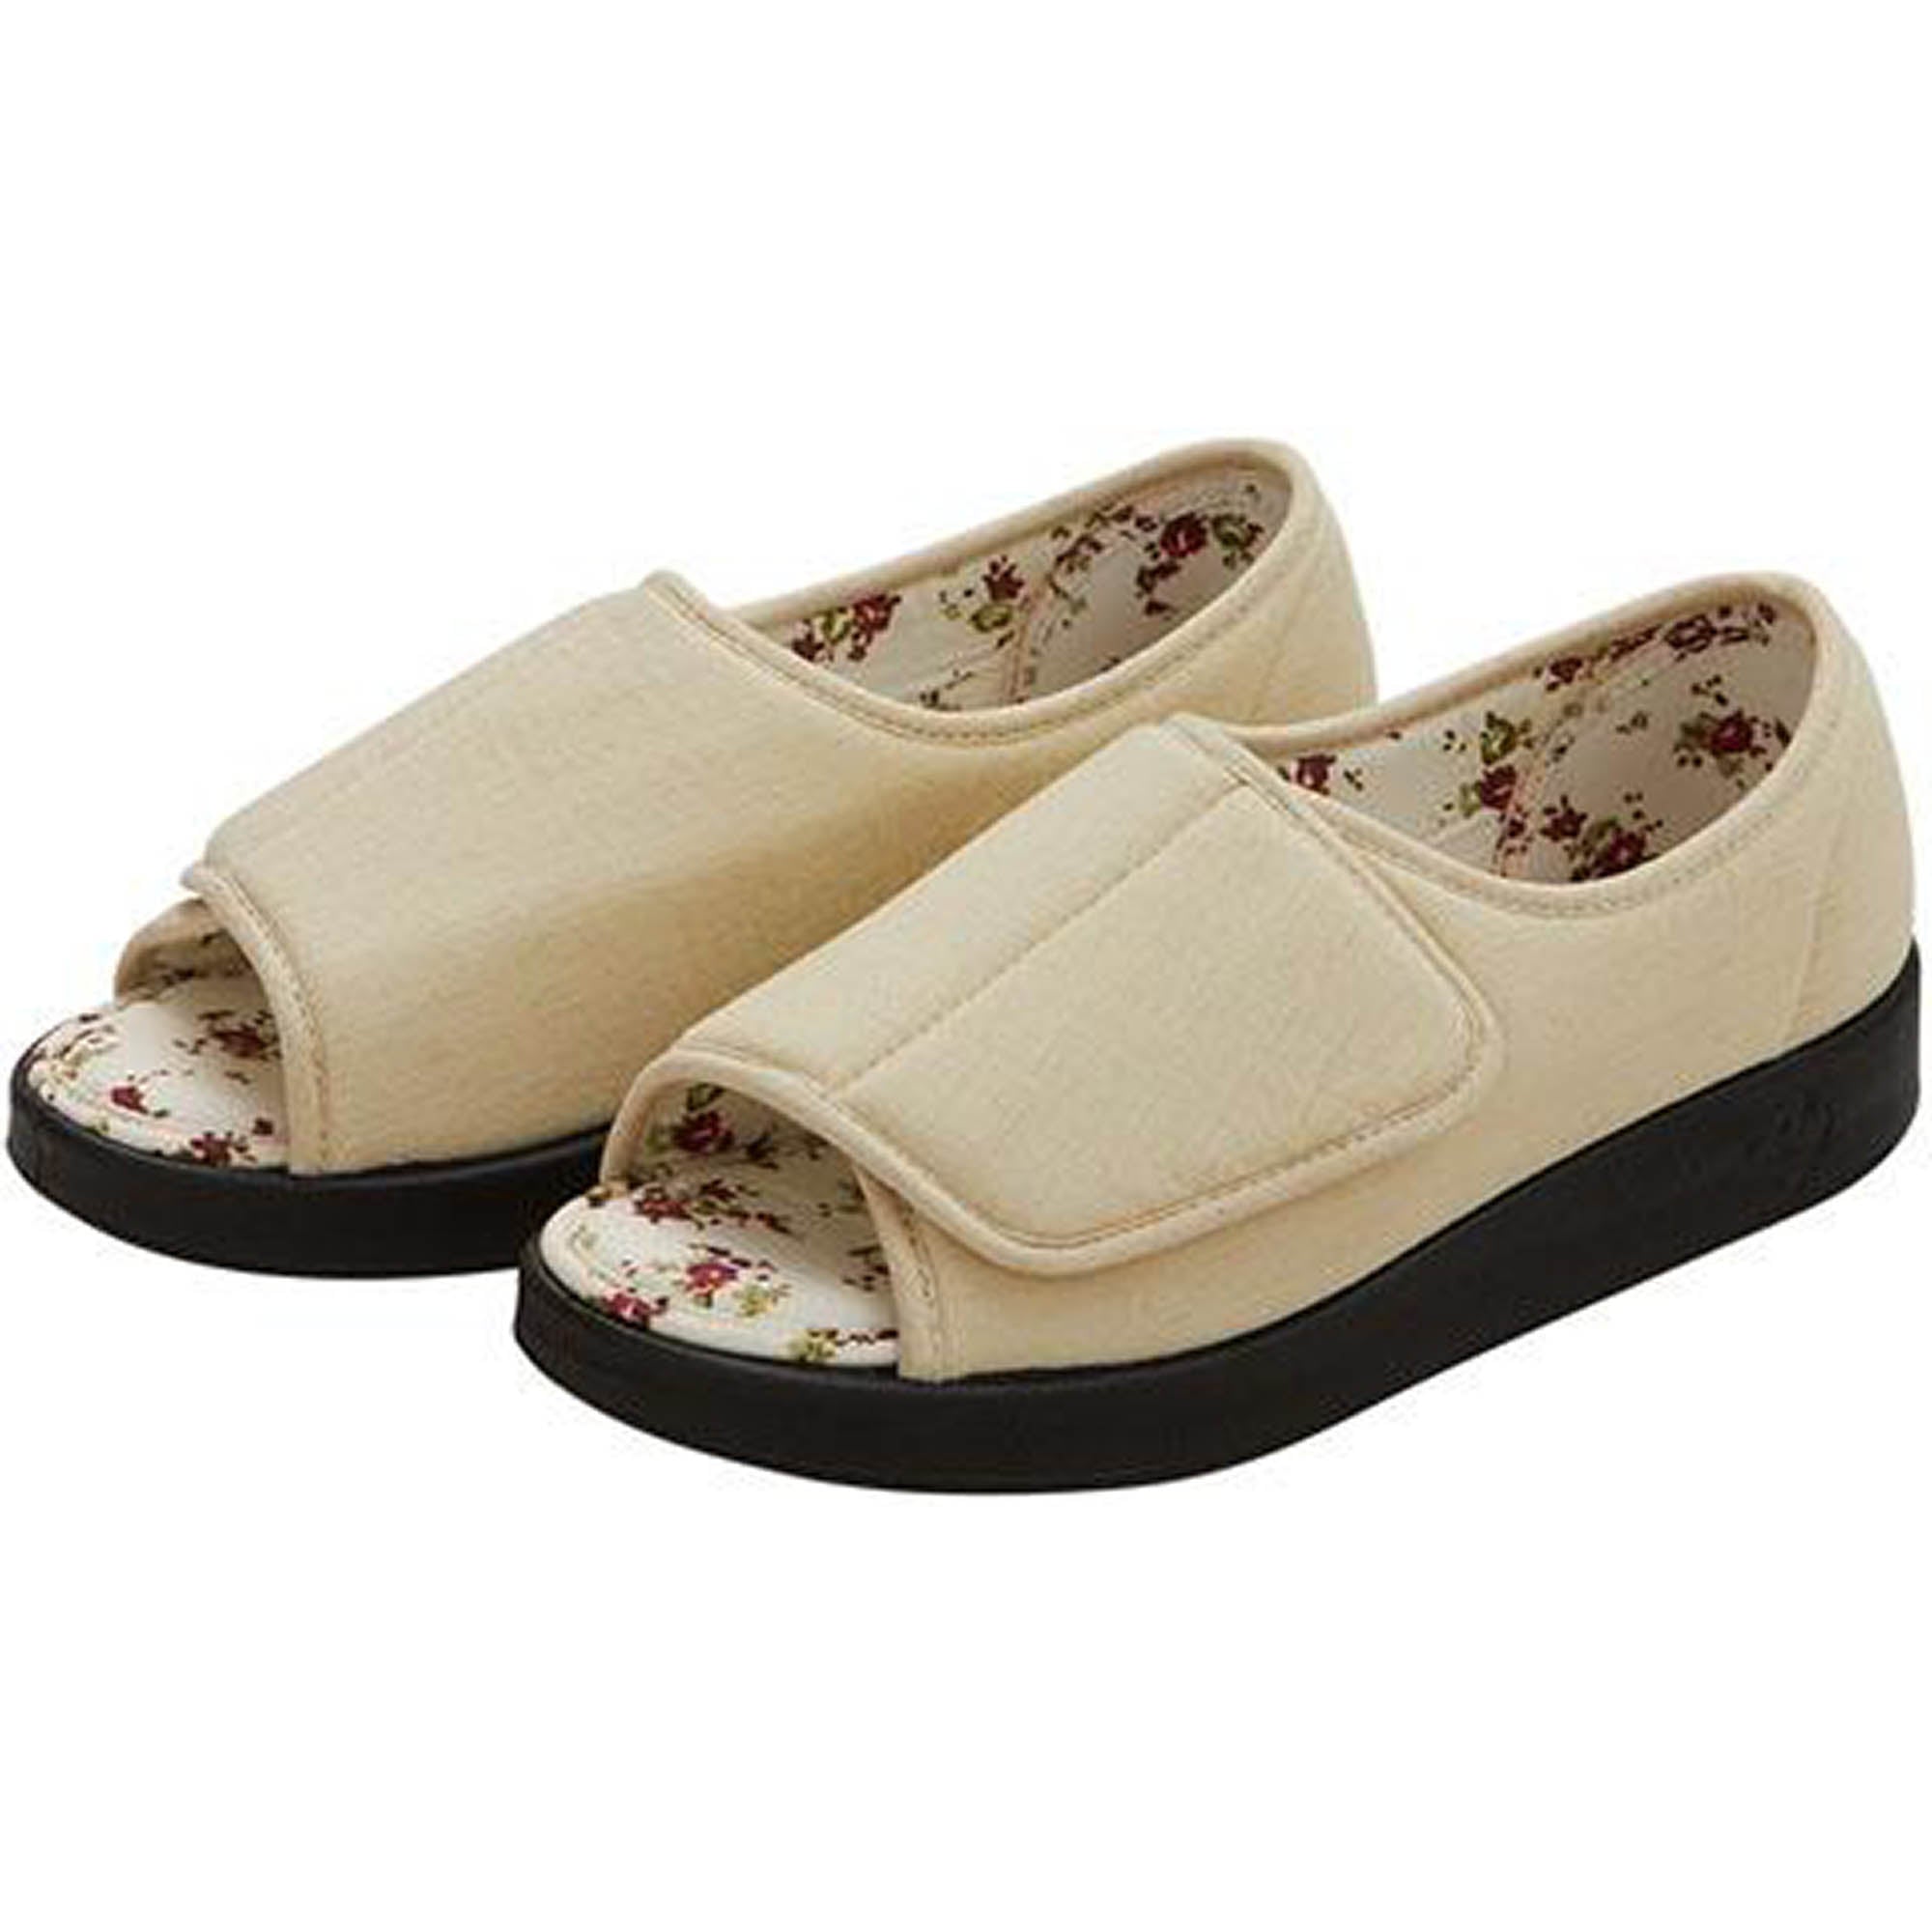 Silverts Women's Extra Wide Open-Toed Shoes - Misty Rose - 6